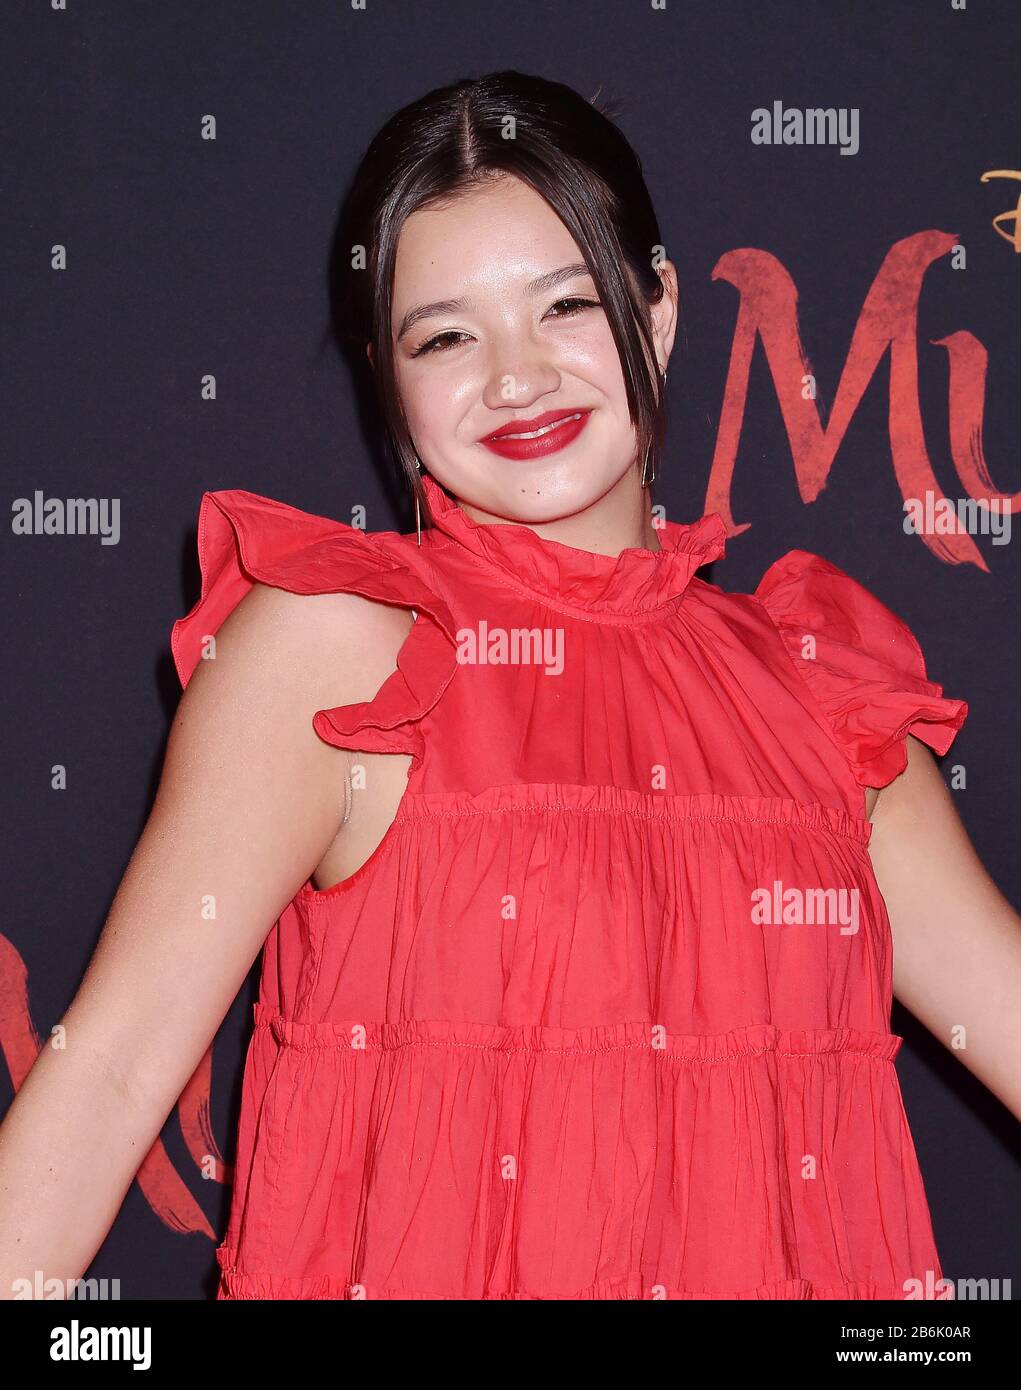 HOLLYWOOD, CA - MARCH 09: Peyton Elizabeth Lee attends the premiere of Disney's 'Mulan' at the El Capitan Theatre on March 09, 2020 in Hollywood, California. Stock Photo